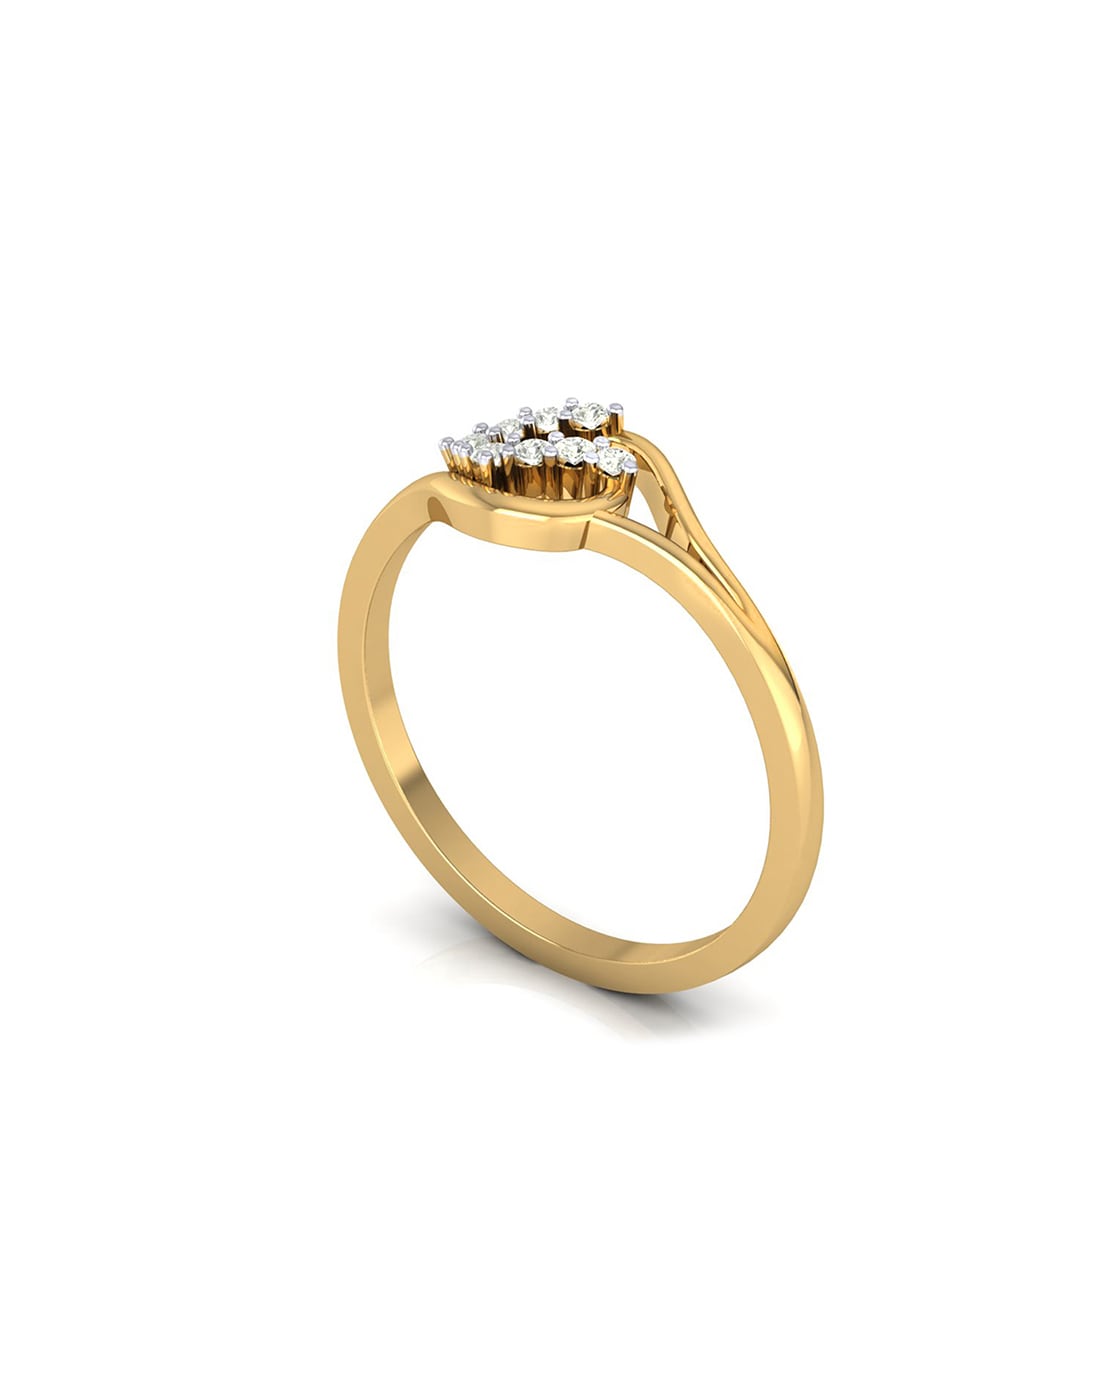 Diamond Solitaire Engagement Ring 14K Yellow Gold 1.22ct F/VS2 GIA